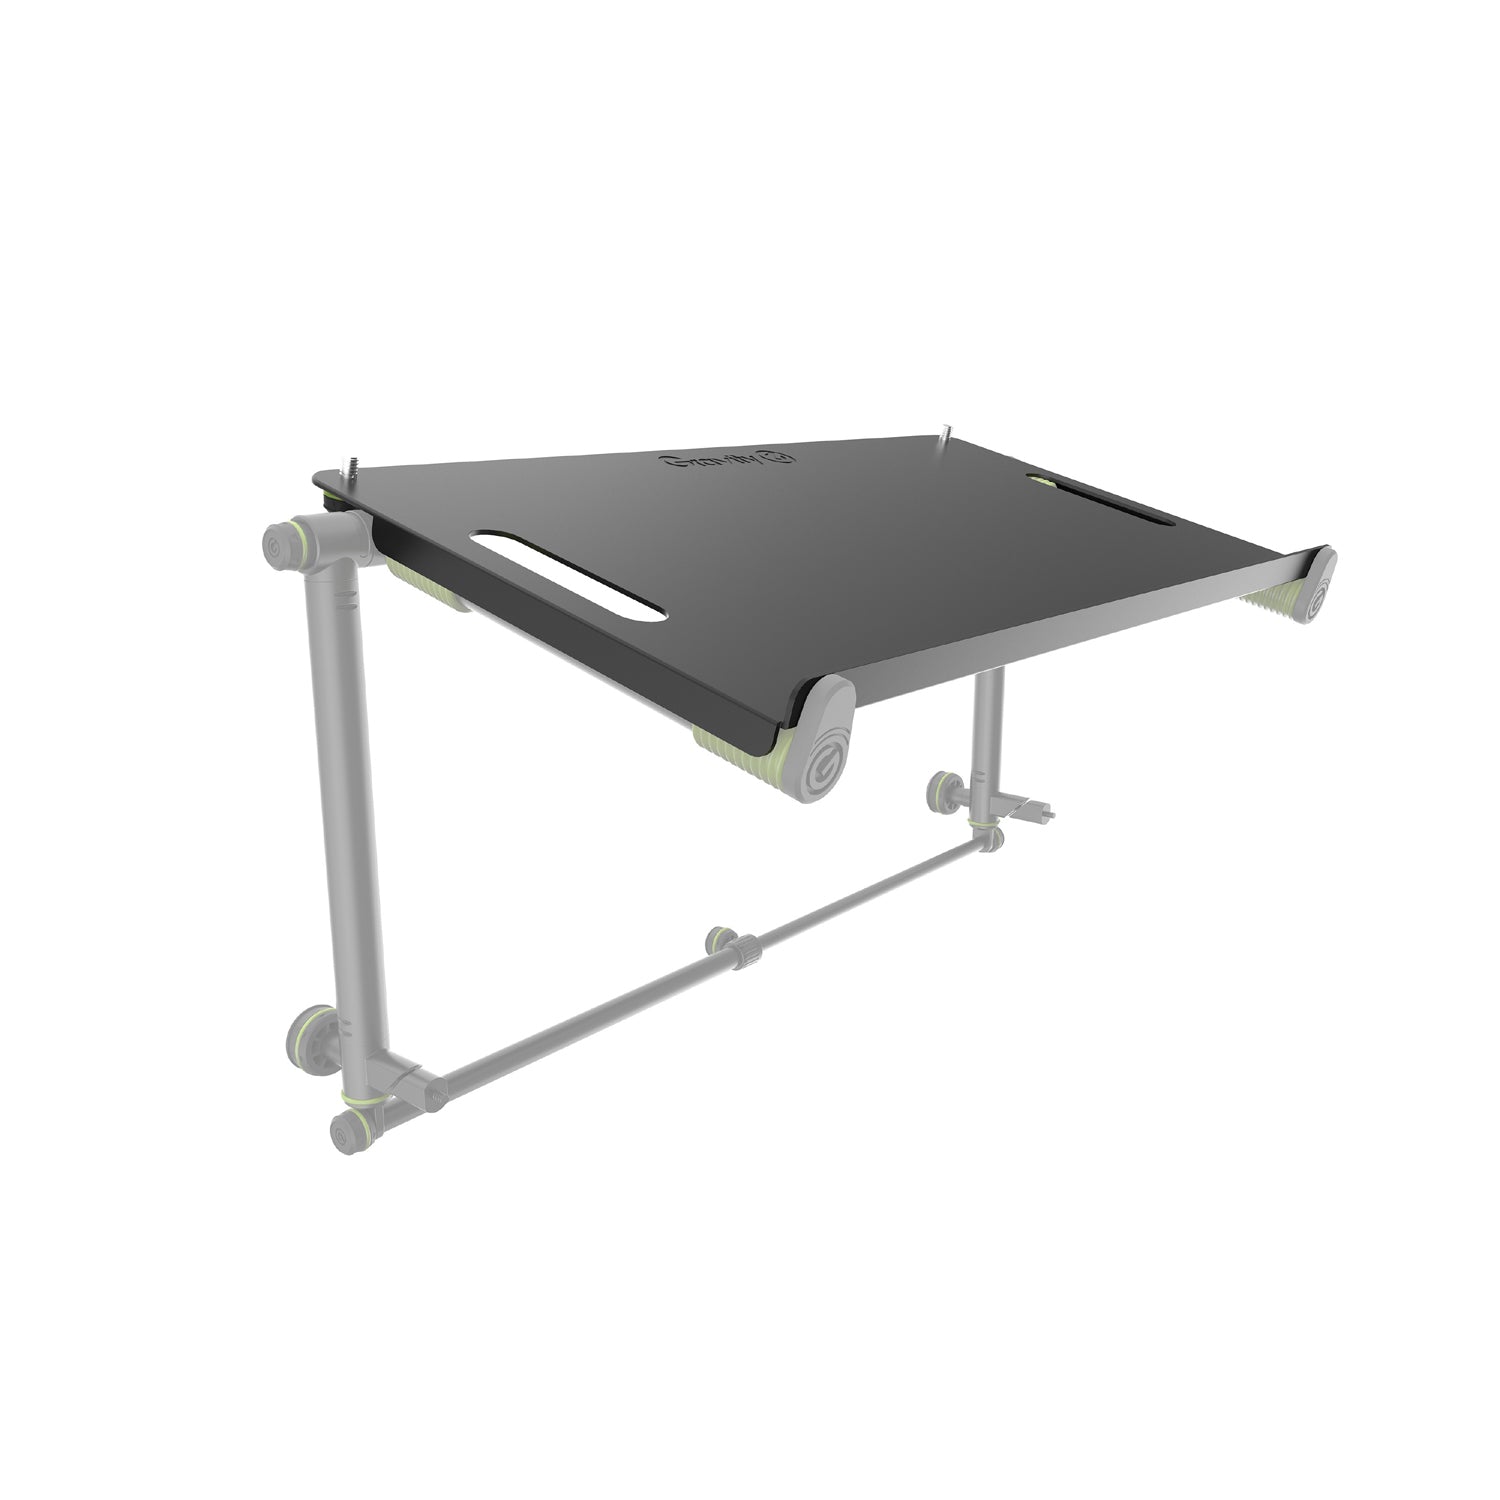 B-Stock: Gravity GKSLTS2T Utility Shelf for Second Tier Keyboard Stand Add-Ons - Hollywood DJ